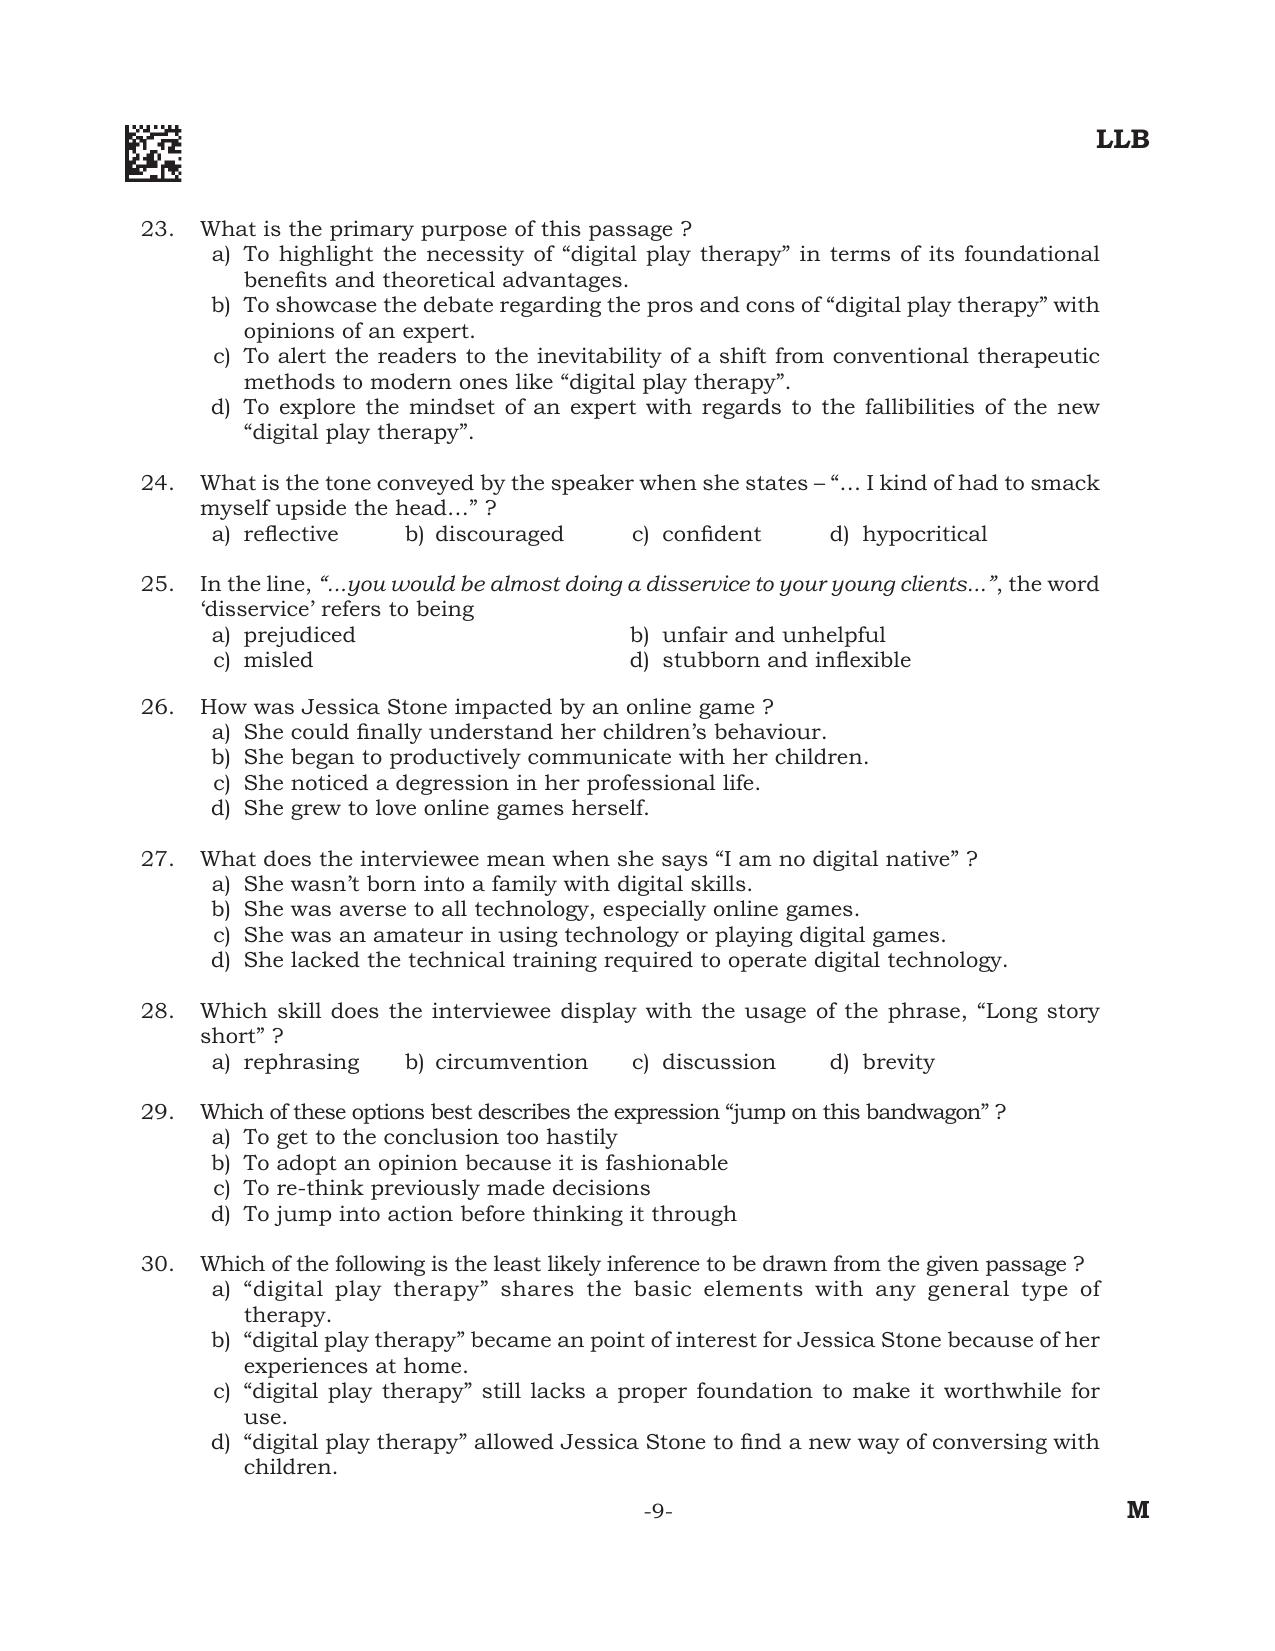 AILET 2022 Question Paper for BA LLB - Page 9